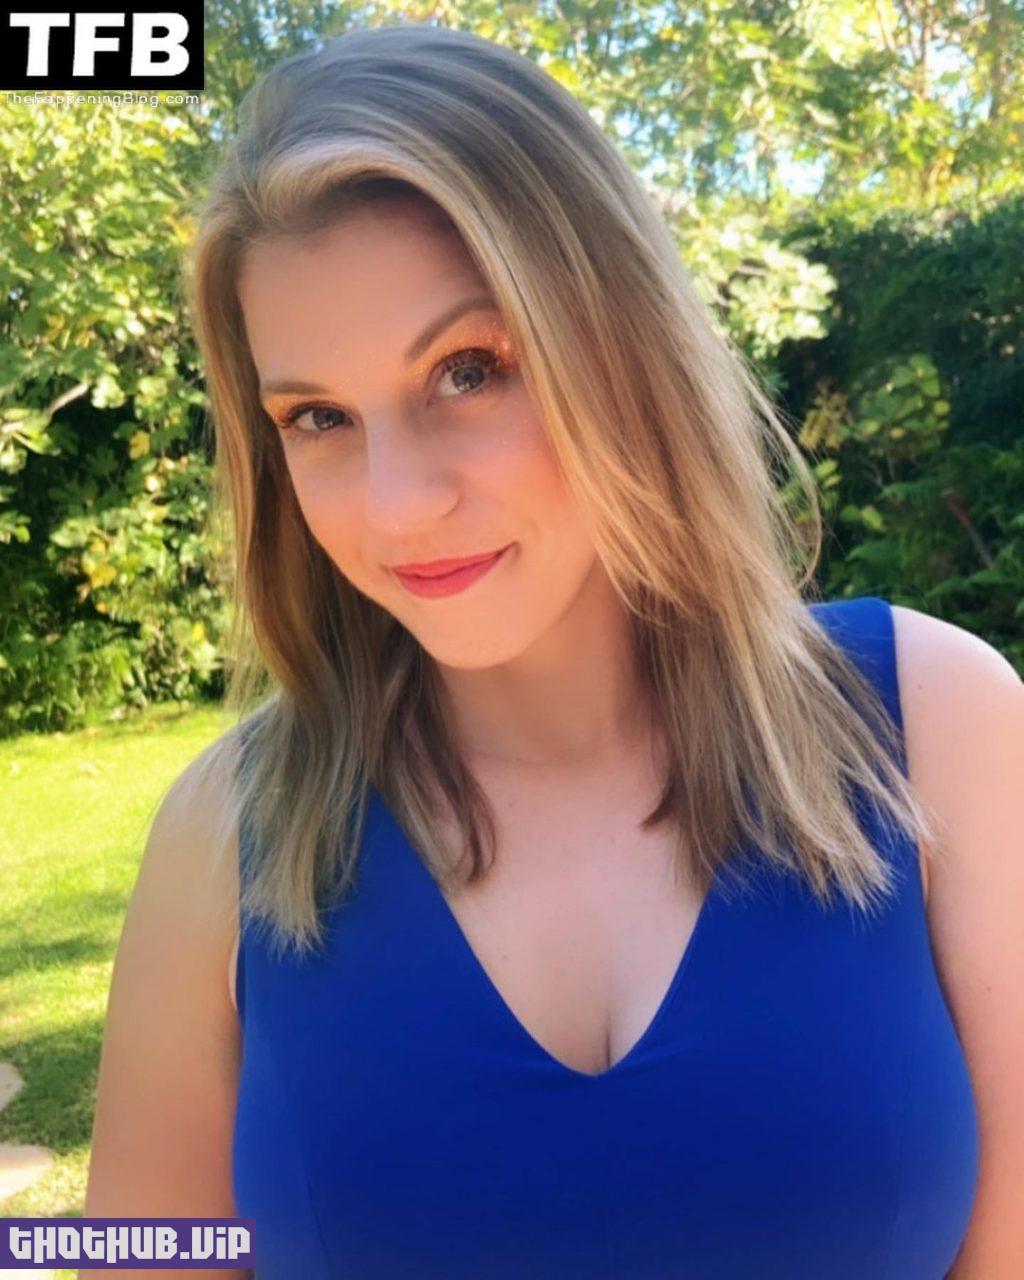 Top Jodie Sweetin Shows Her New Haircut (2 Photos + GIF) On Thothub